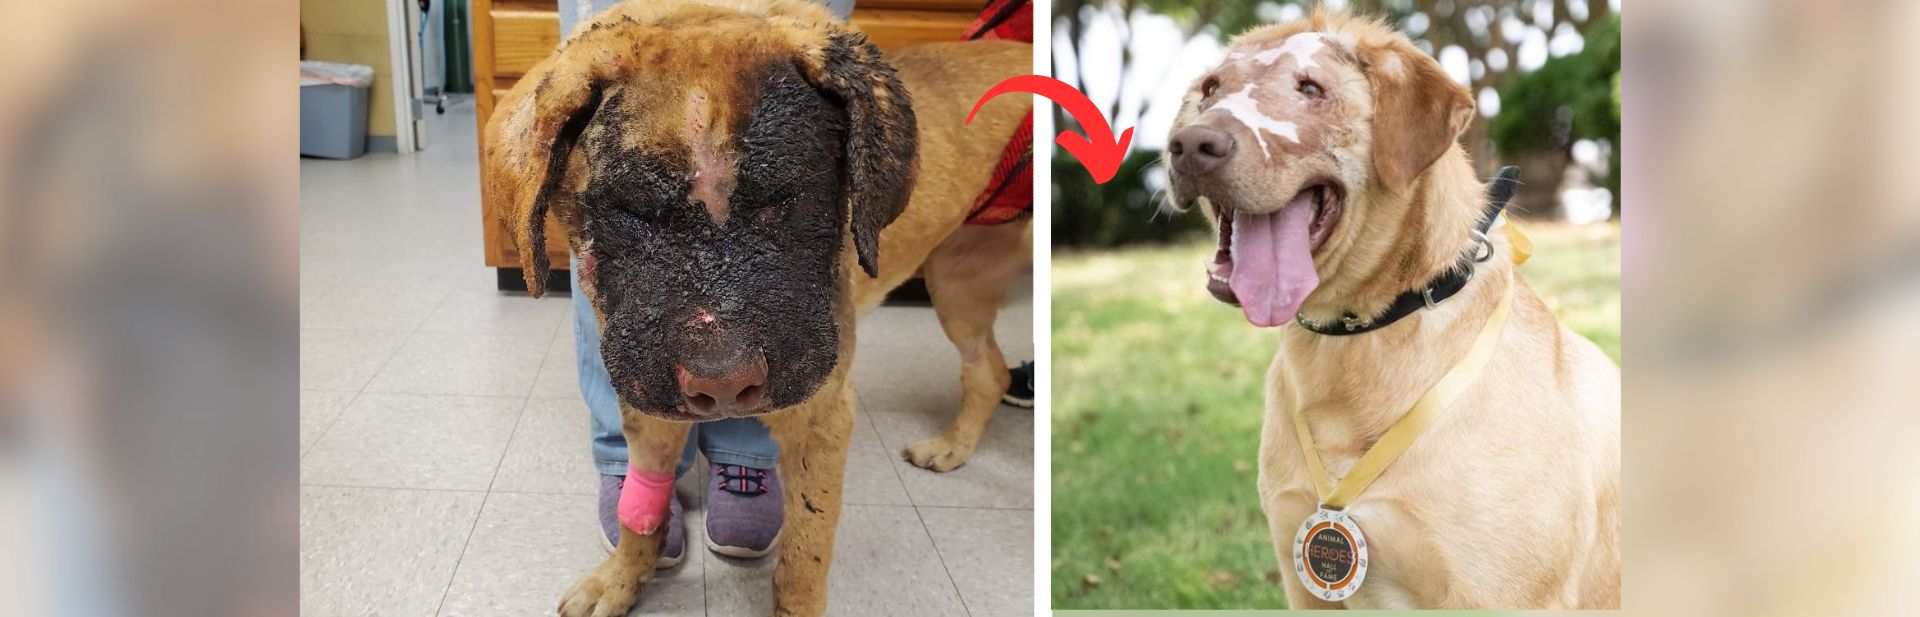 Dog Severely Burned by a Child Makes Astonishing Recovery and Embraces Joyful New Beginnings